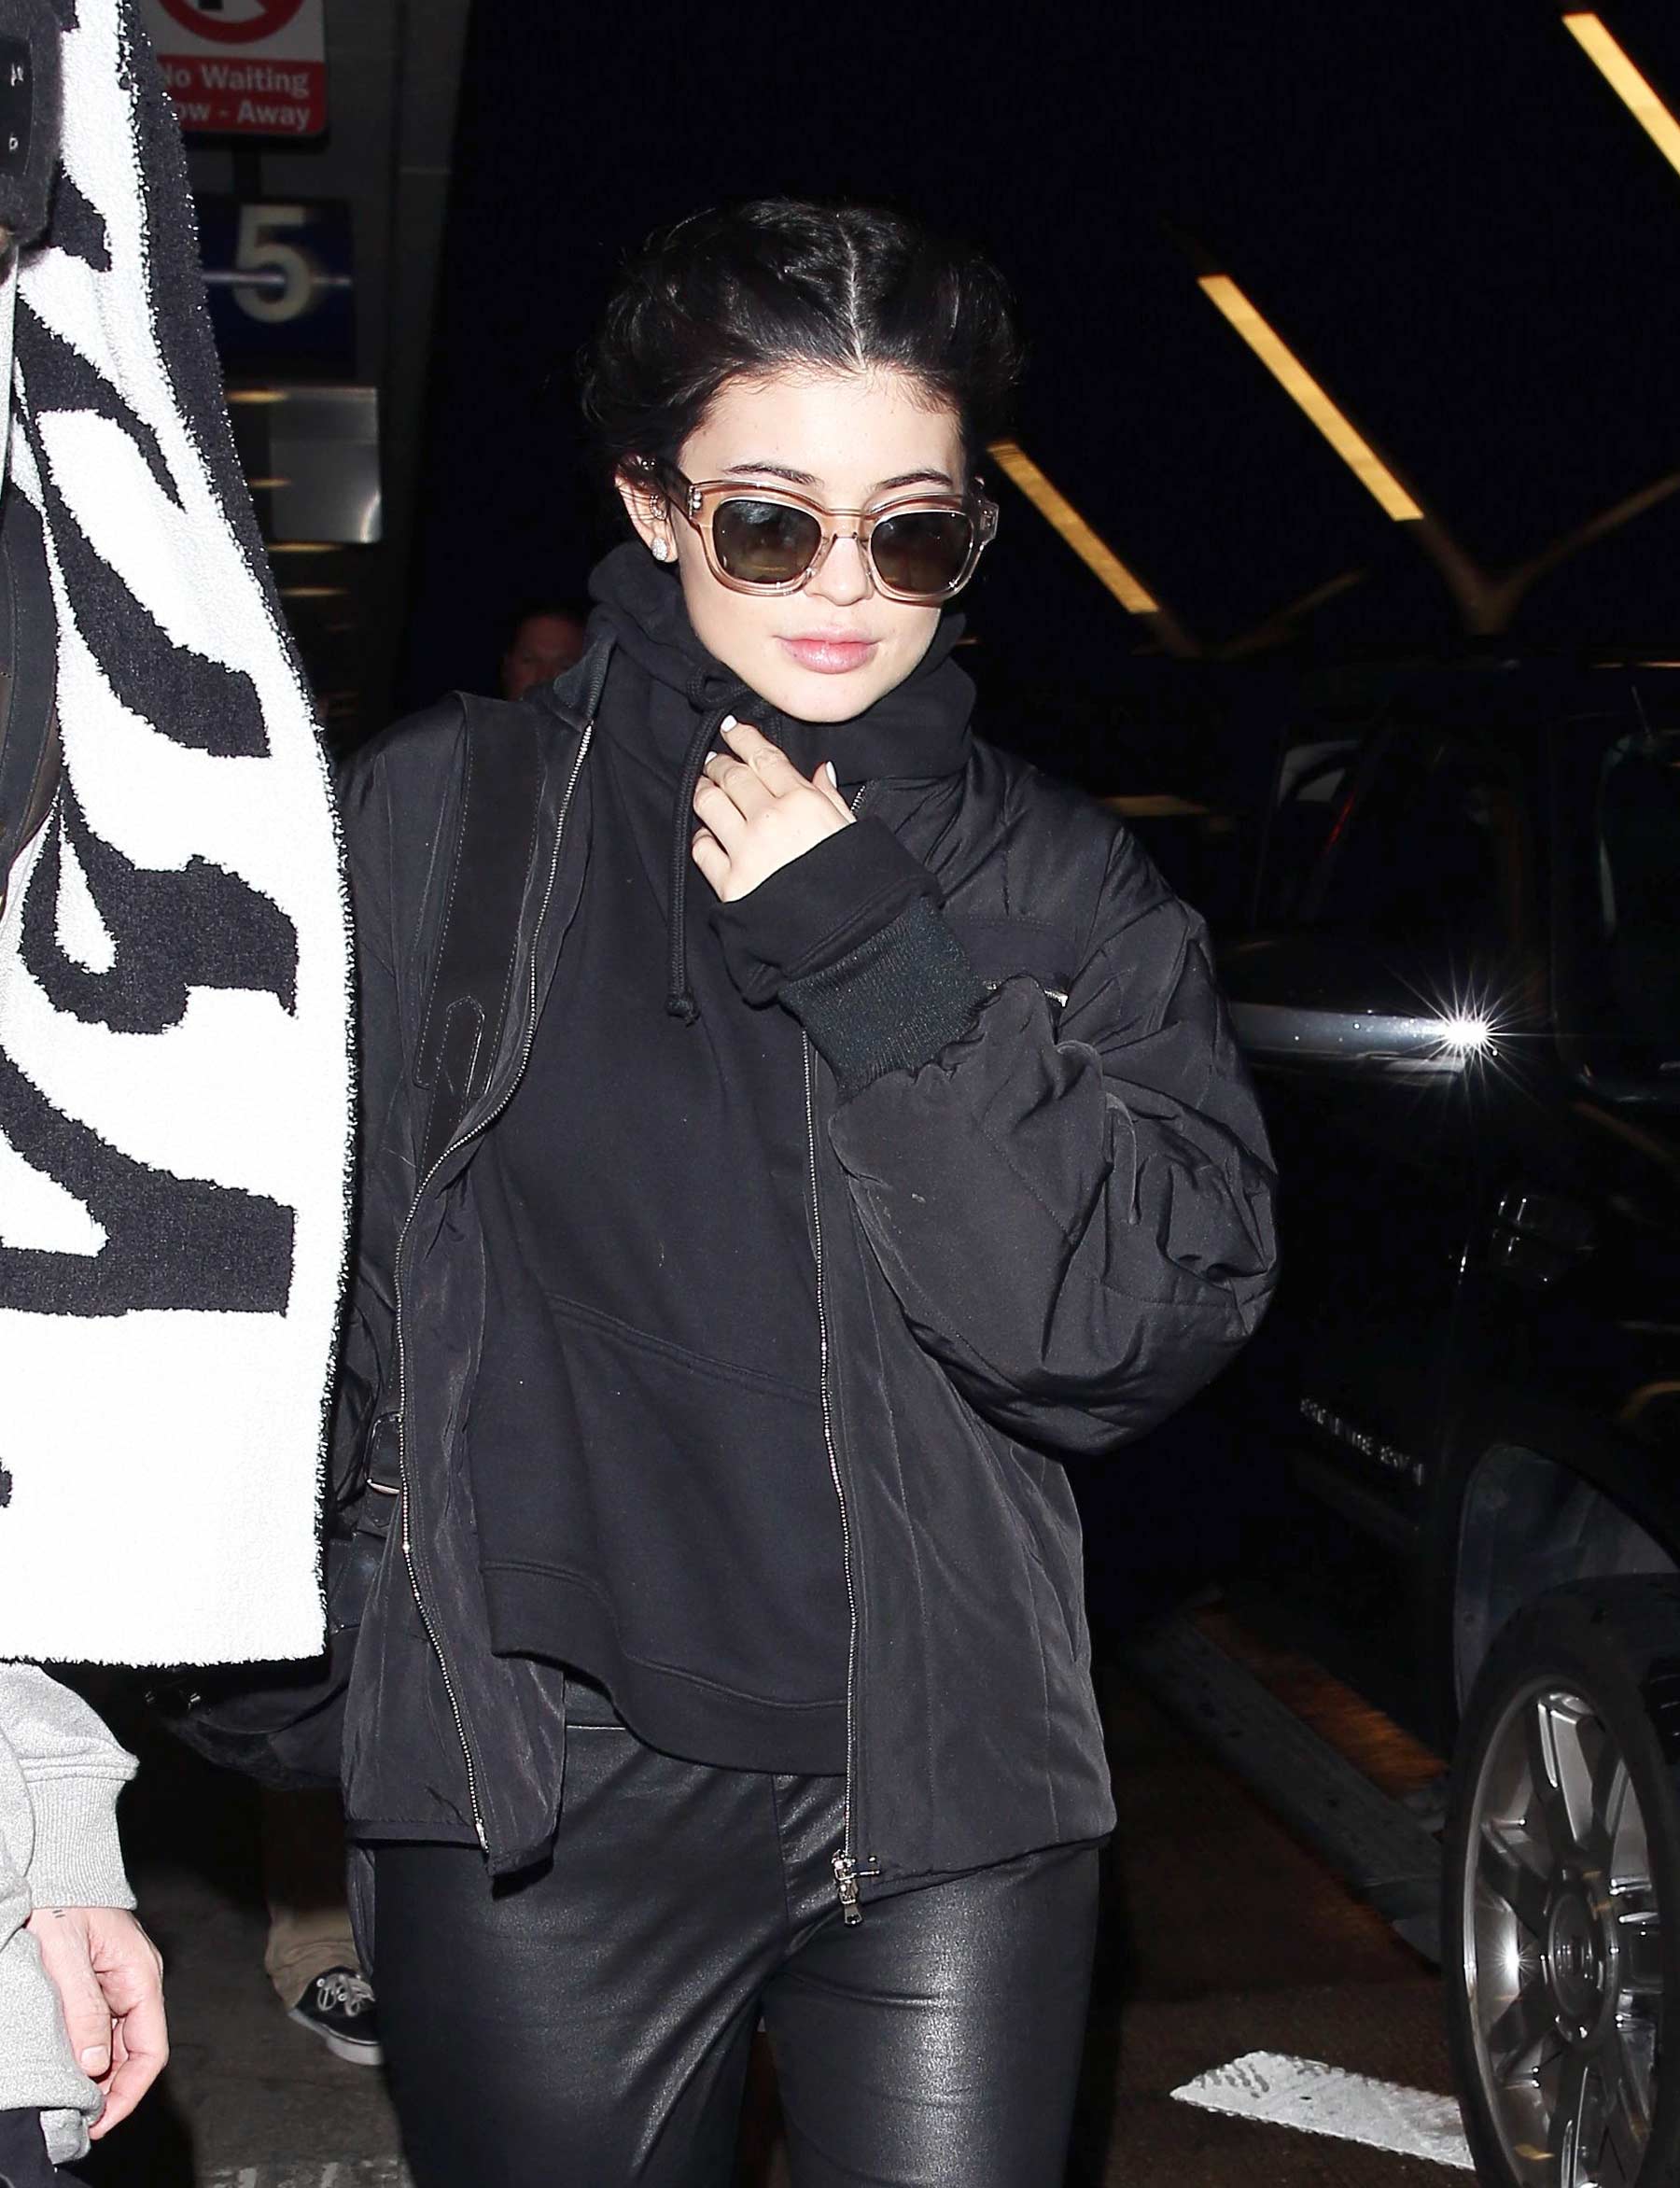 Kylie Jenner leaving LAX airport